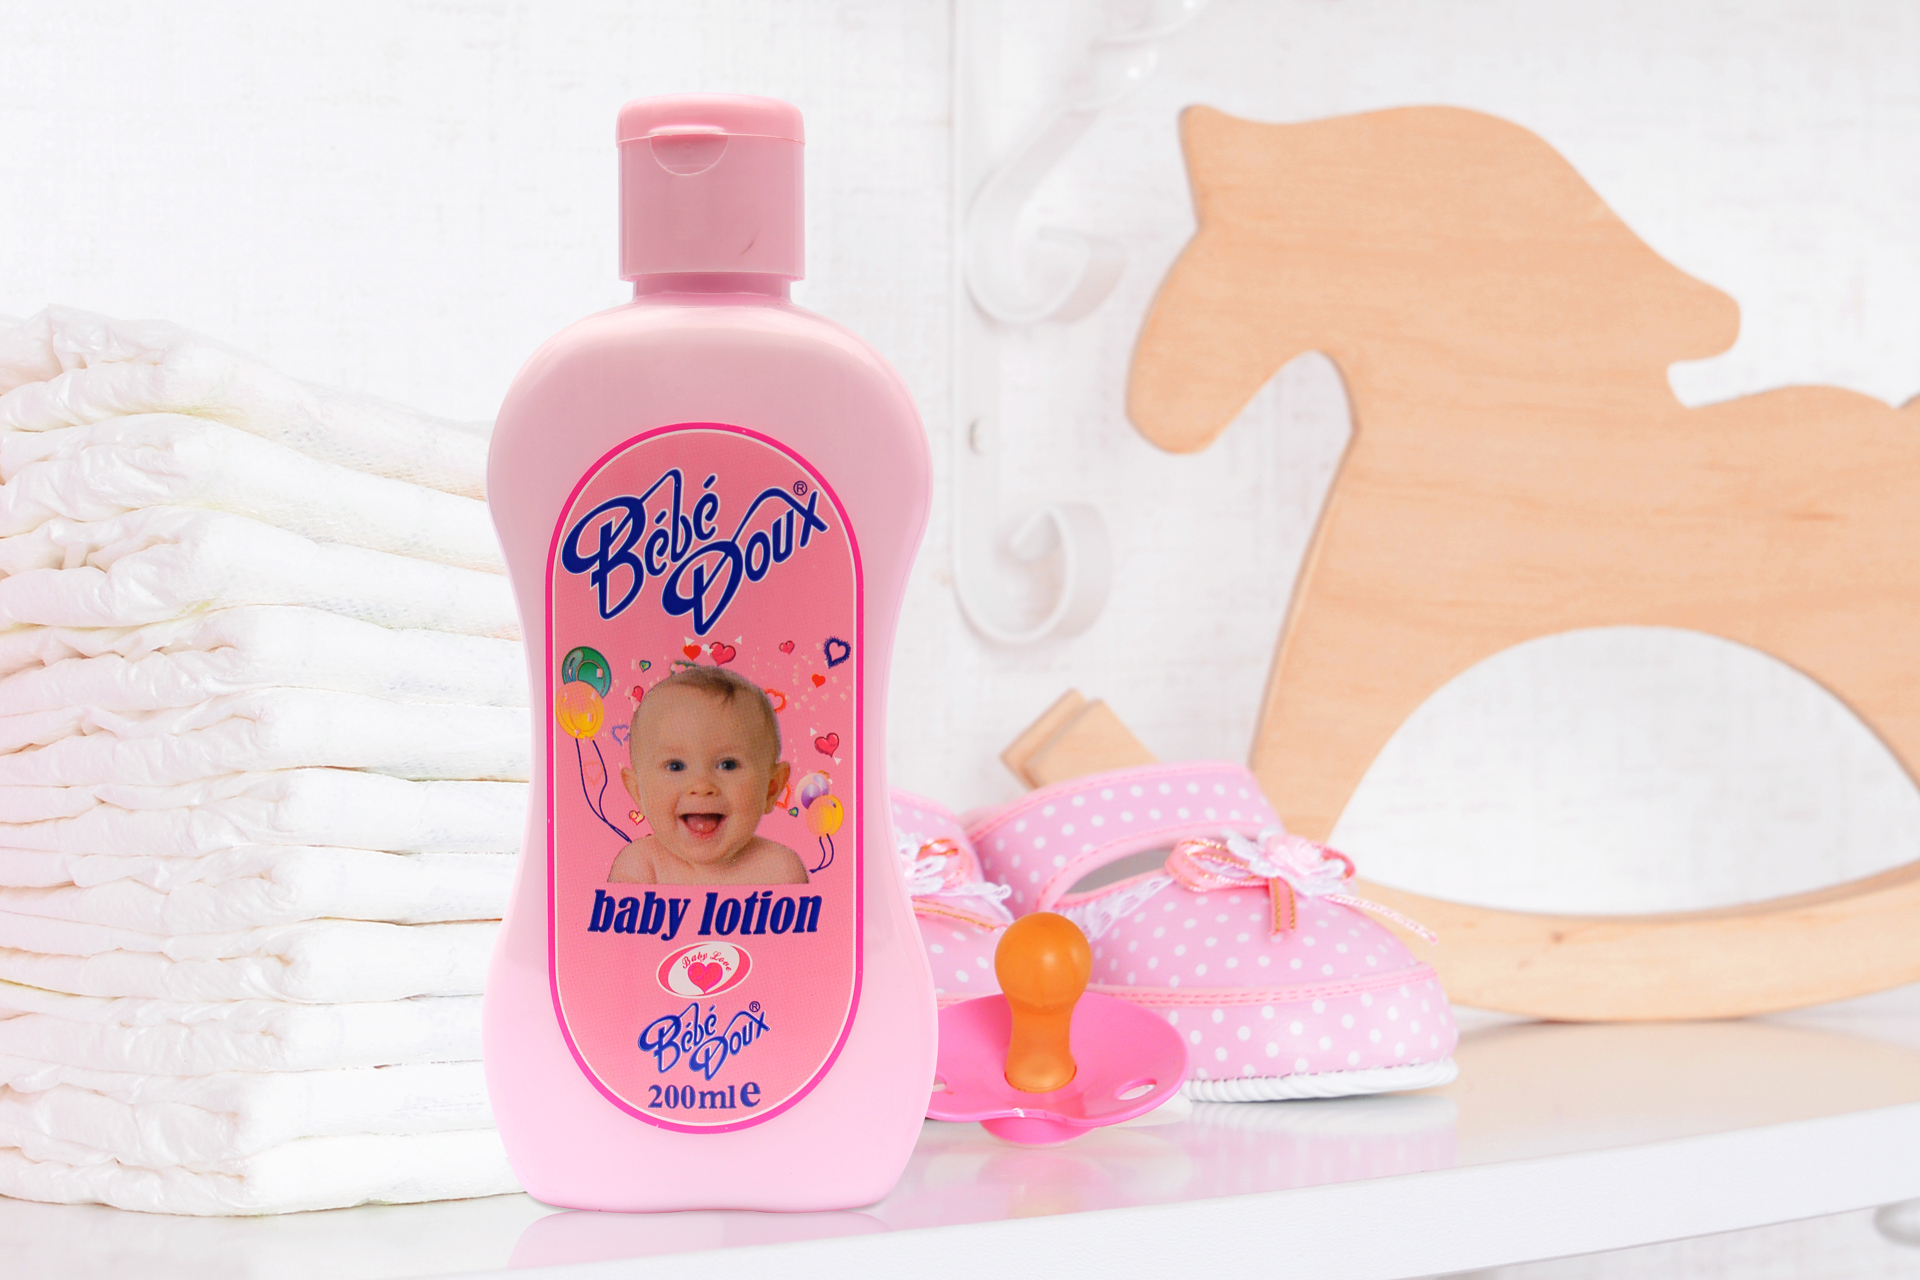 https://orbitsarl.com/wp-content/uploads/2017/08/Product-Baby_BabeDoux-Baby-Lotion-200ml_1920x1280-FIN.jpg